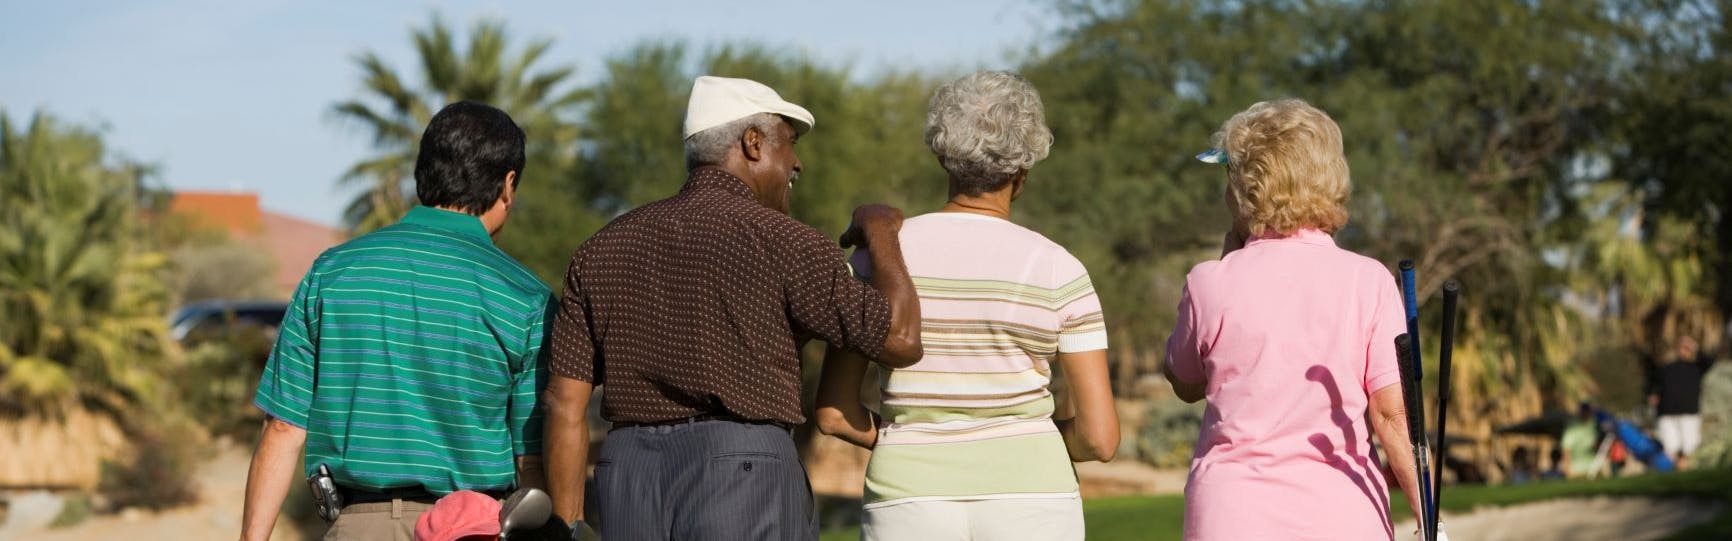 A group of 4 older golfers walks on the course together with their backs turned to the camera. 